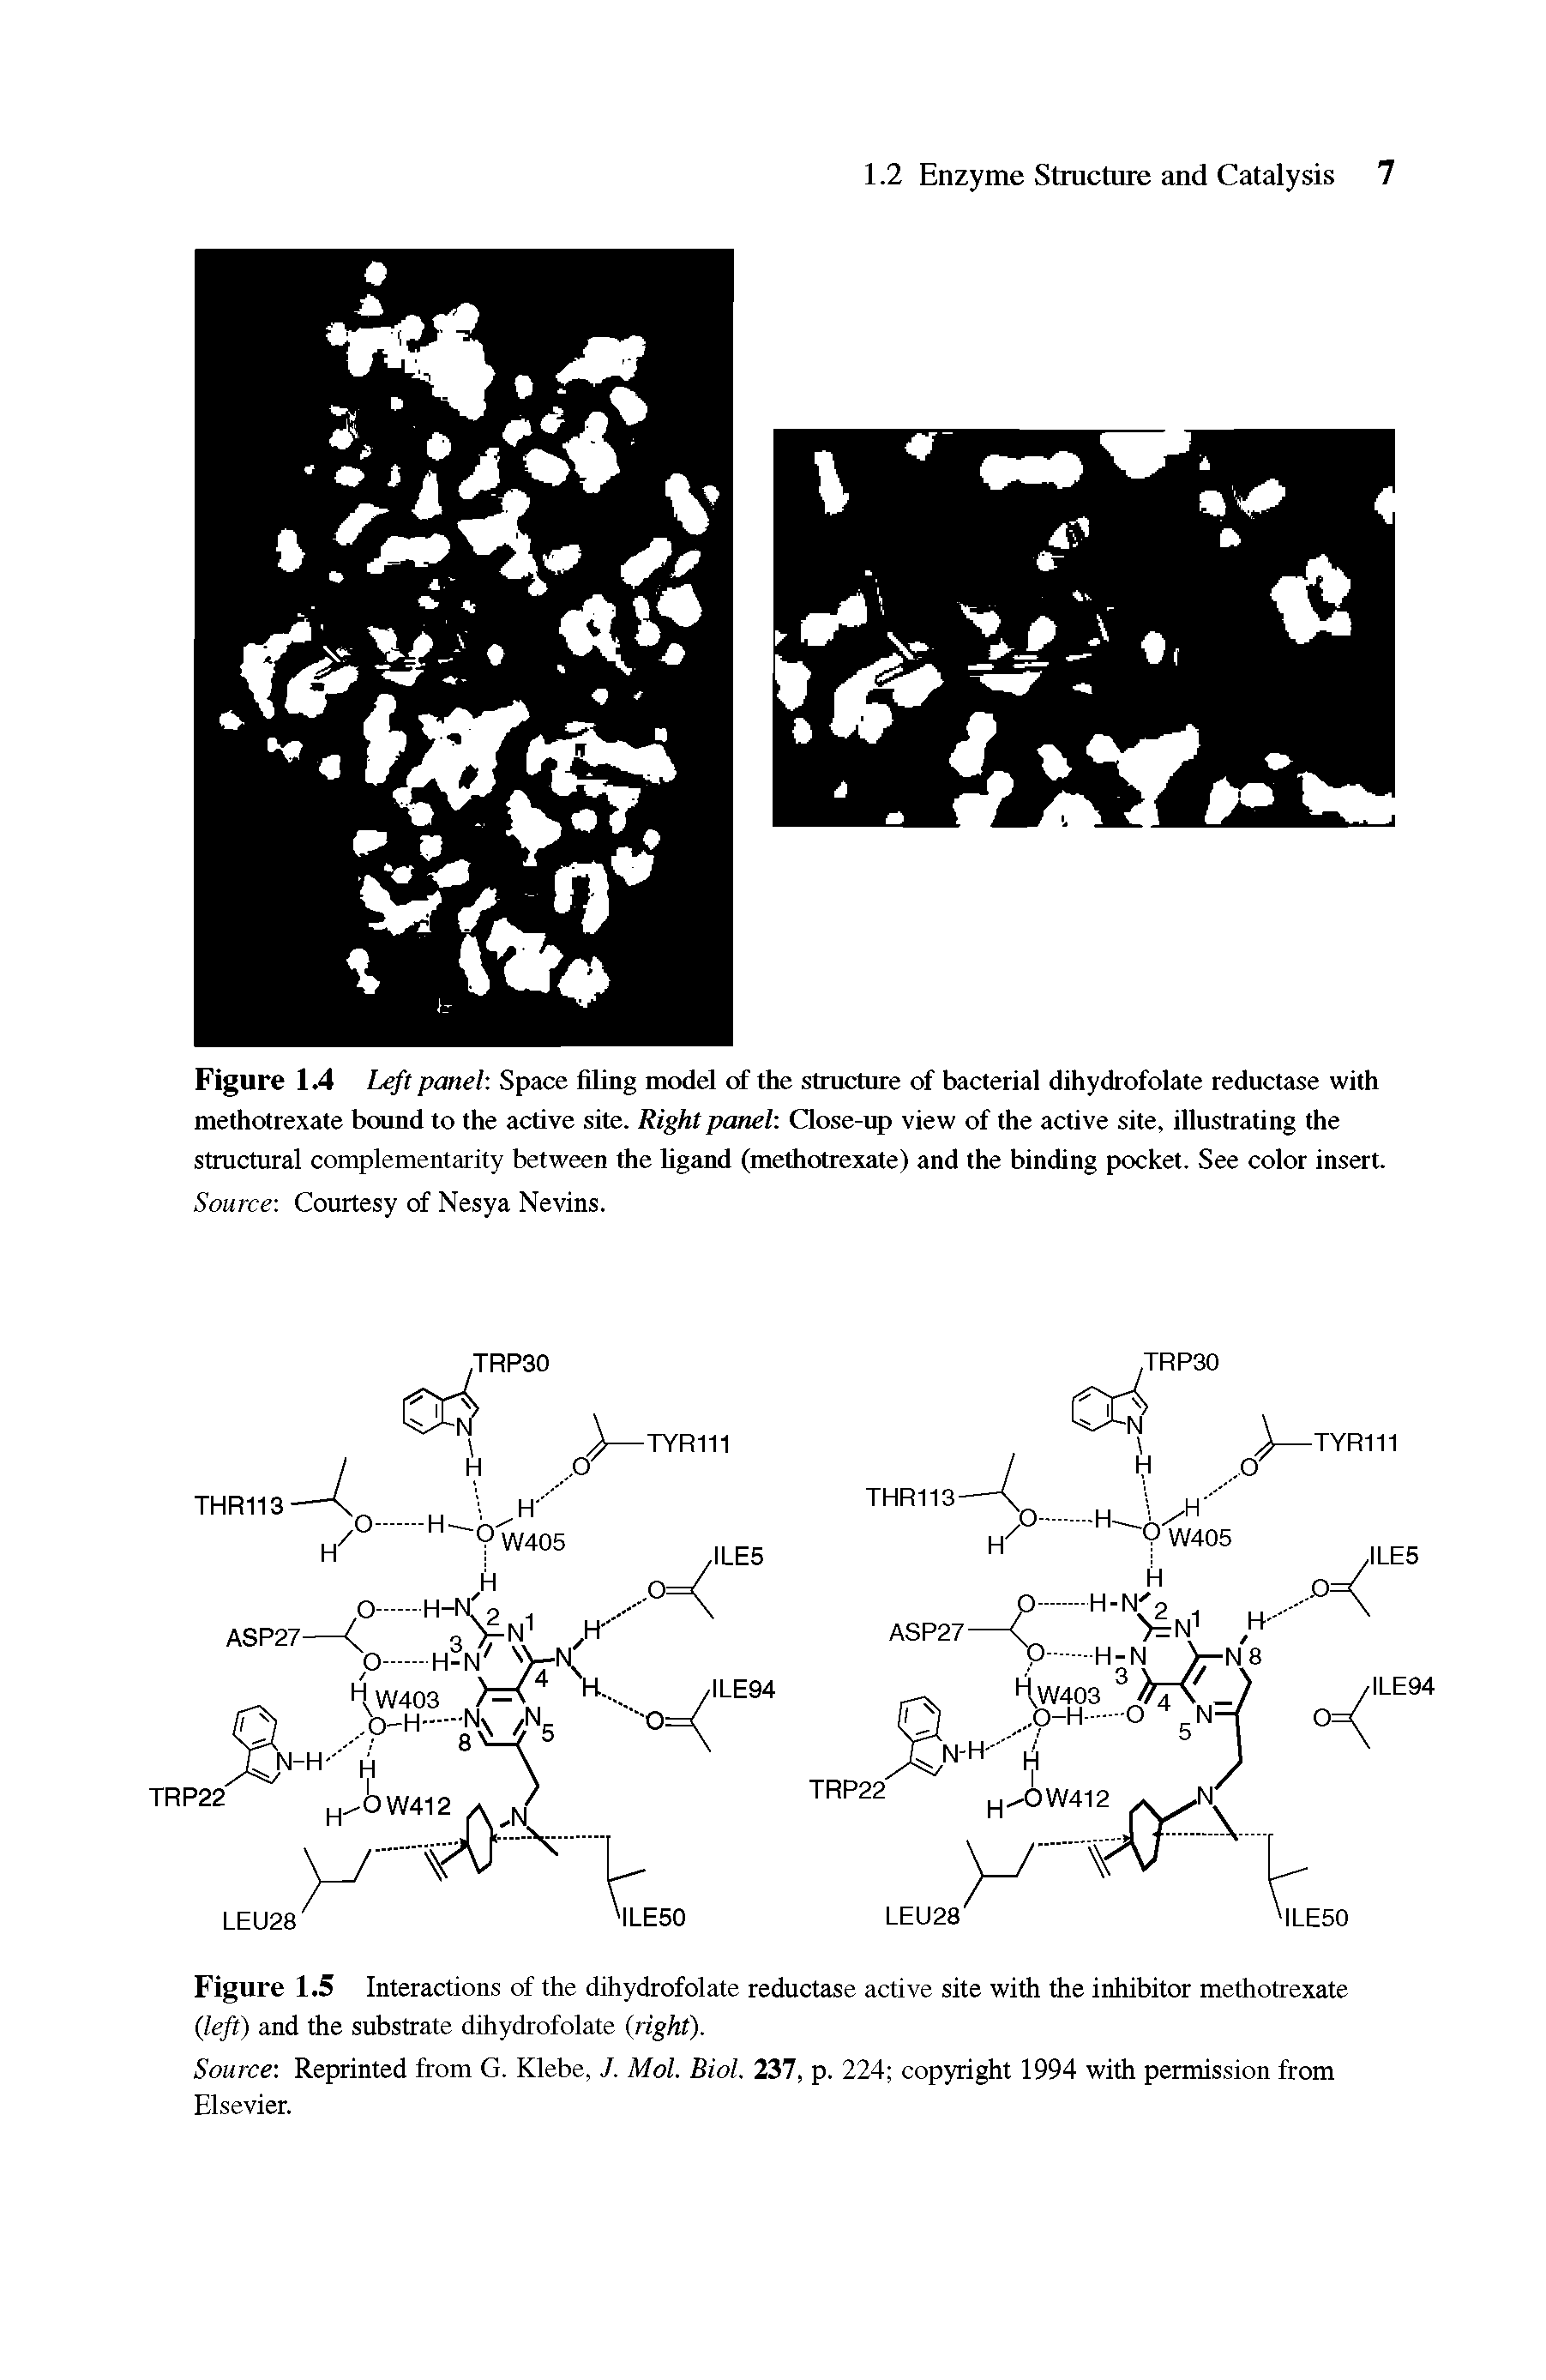 Figure 1.4 Left panel Space filing model of the structure of bacterial dihydrofolate reductase with methotrexate bound to the active site. Right panel Close-up view of the active site, illustrating the structural complementarity between the ligand (methotrexate) and the binding pocket. See color insert. Source Courtesy of Nesya Nevins.